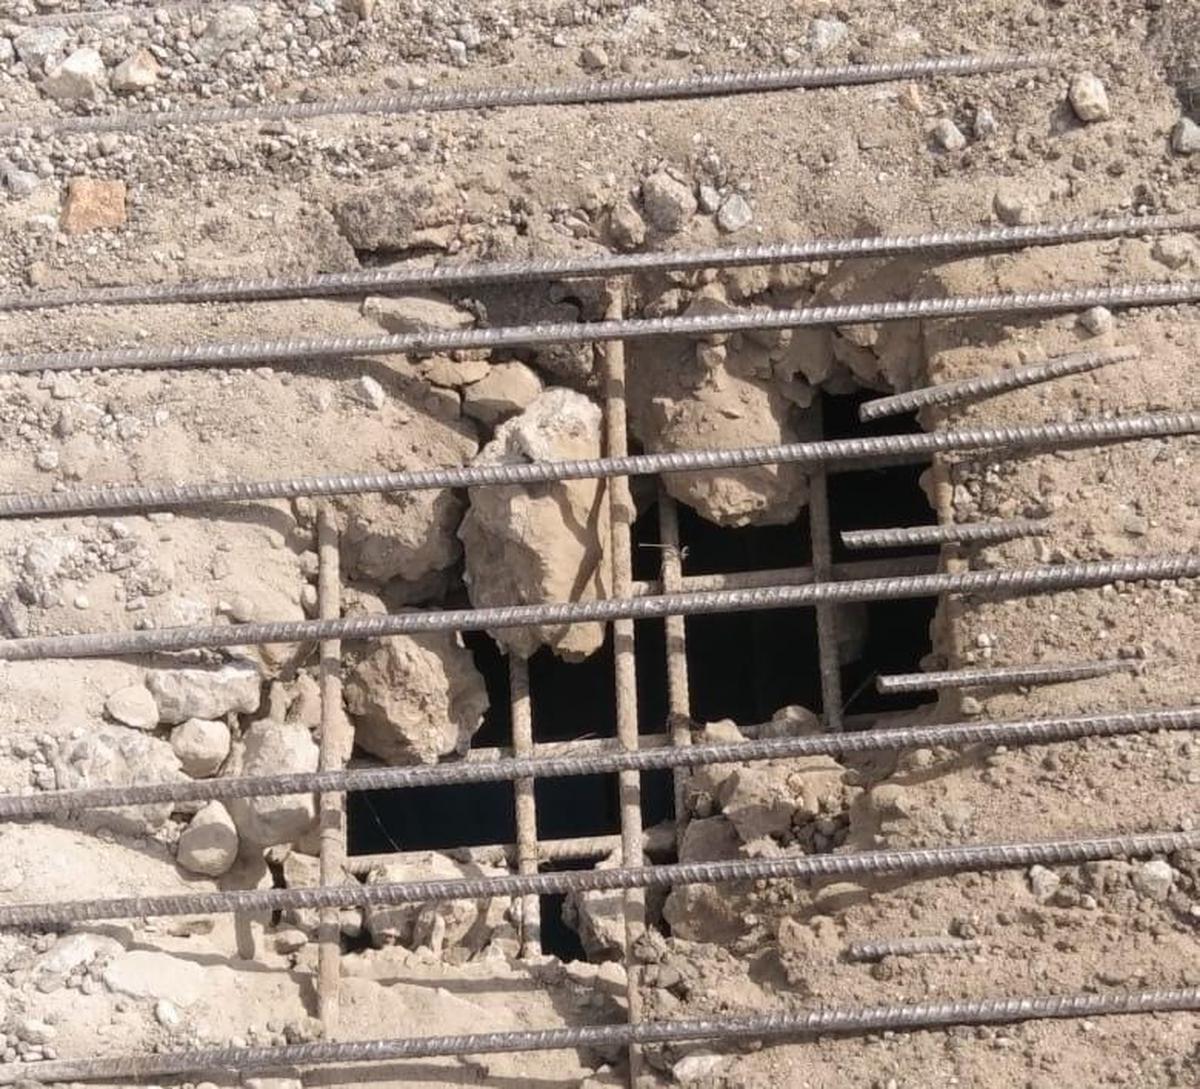 The latest hole in the Sumanahalli flyover, which was discovered on September 20, 2022.